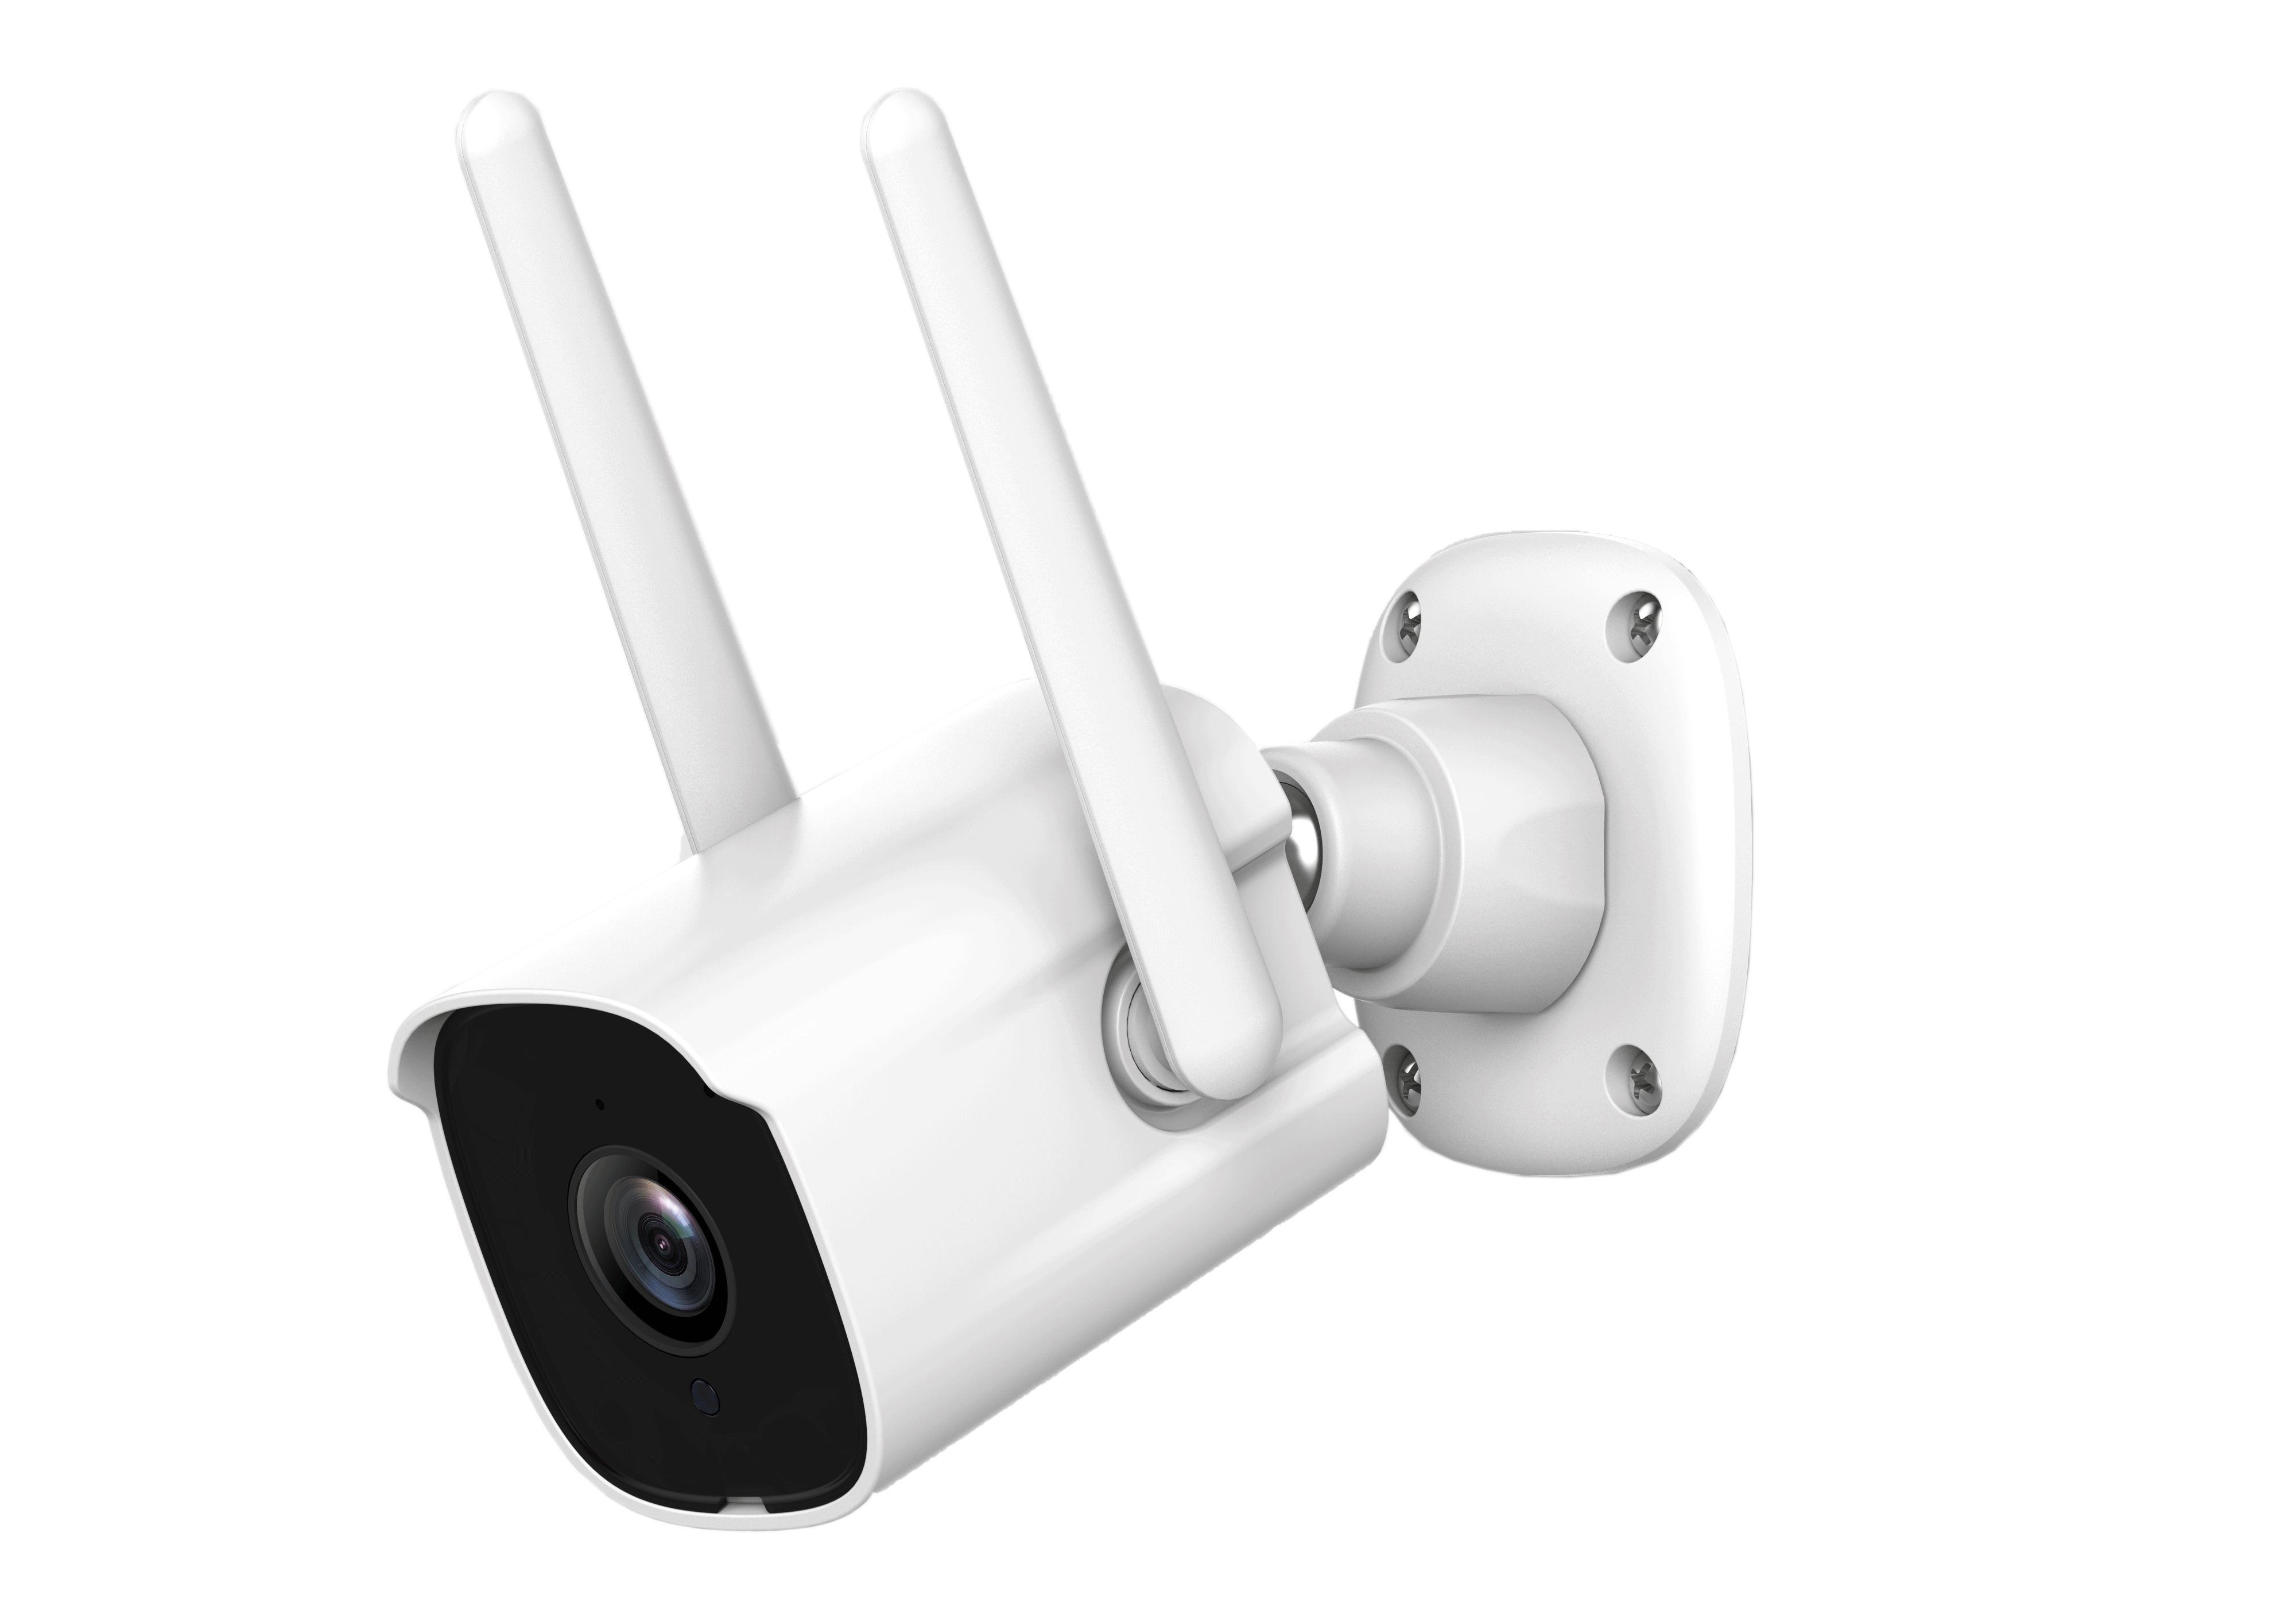 How do wireless cameras connect to the Internet